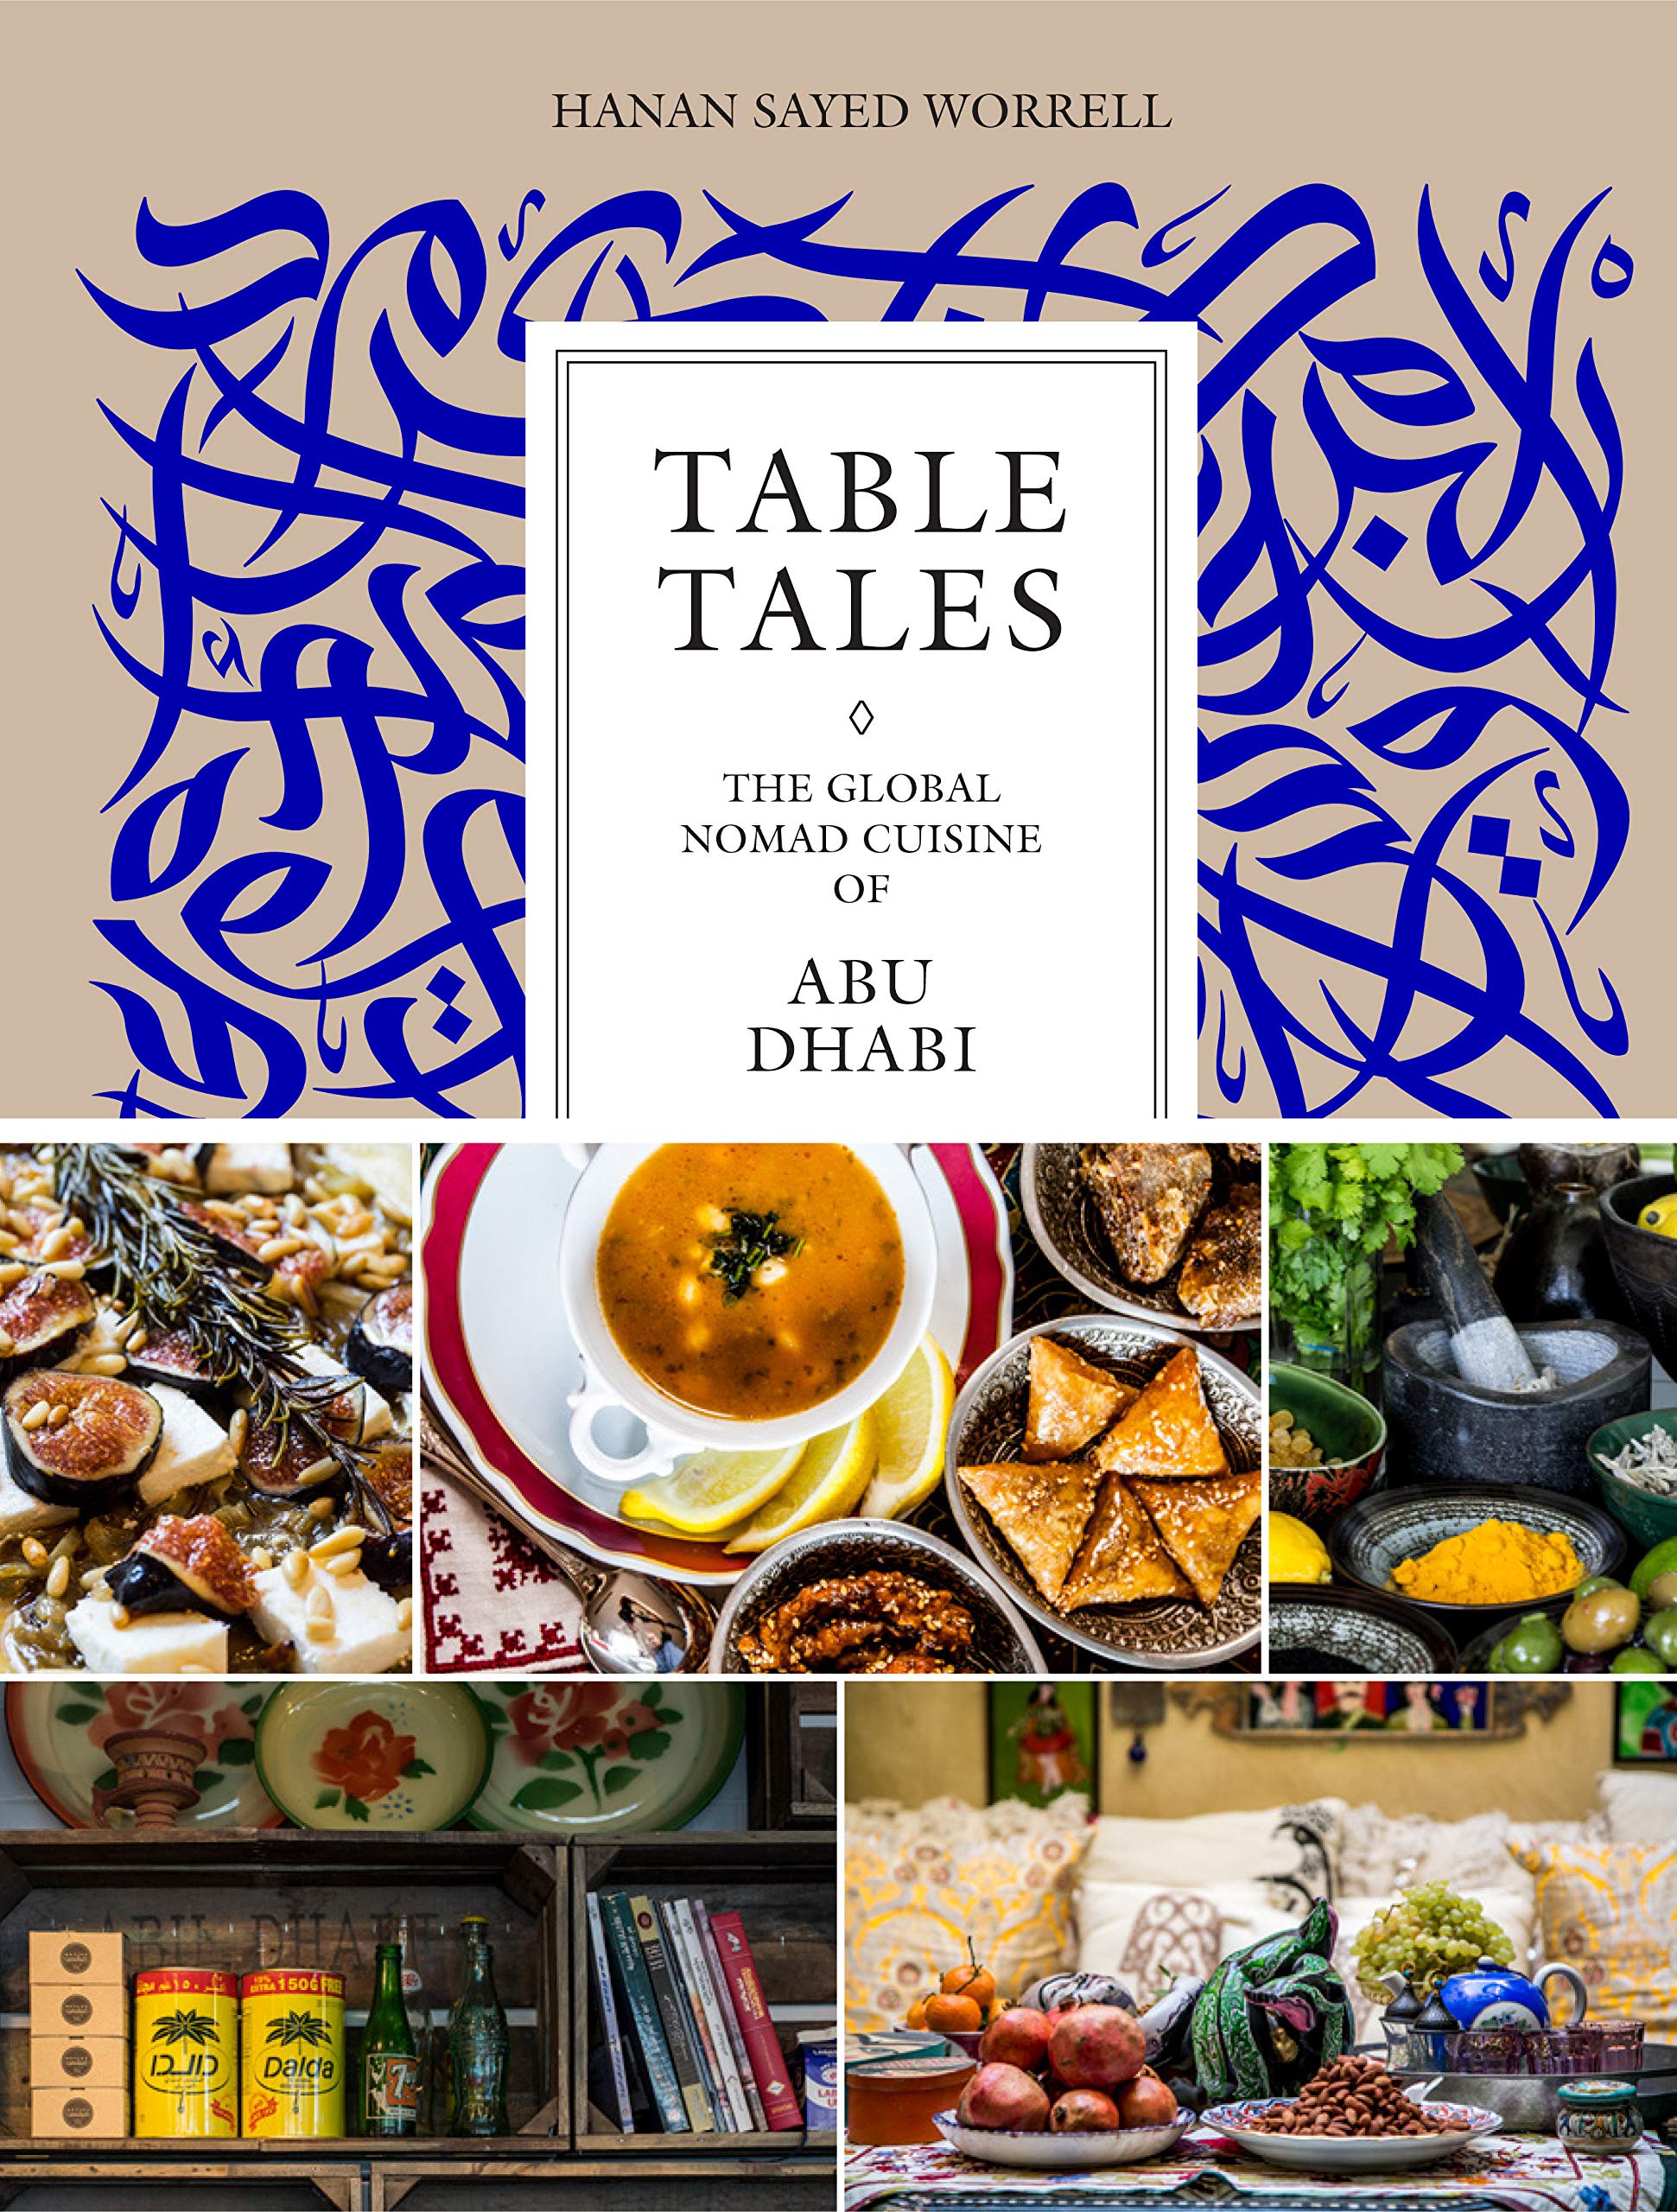 Table Tales: The Global Nomad Cuisine of Abu Dhabi (Hanan Sayed Worrell)